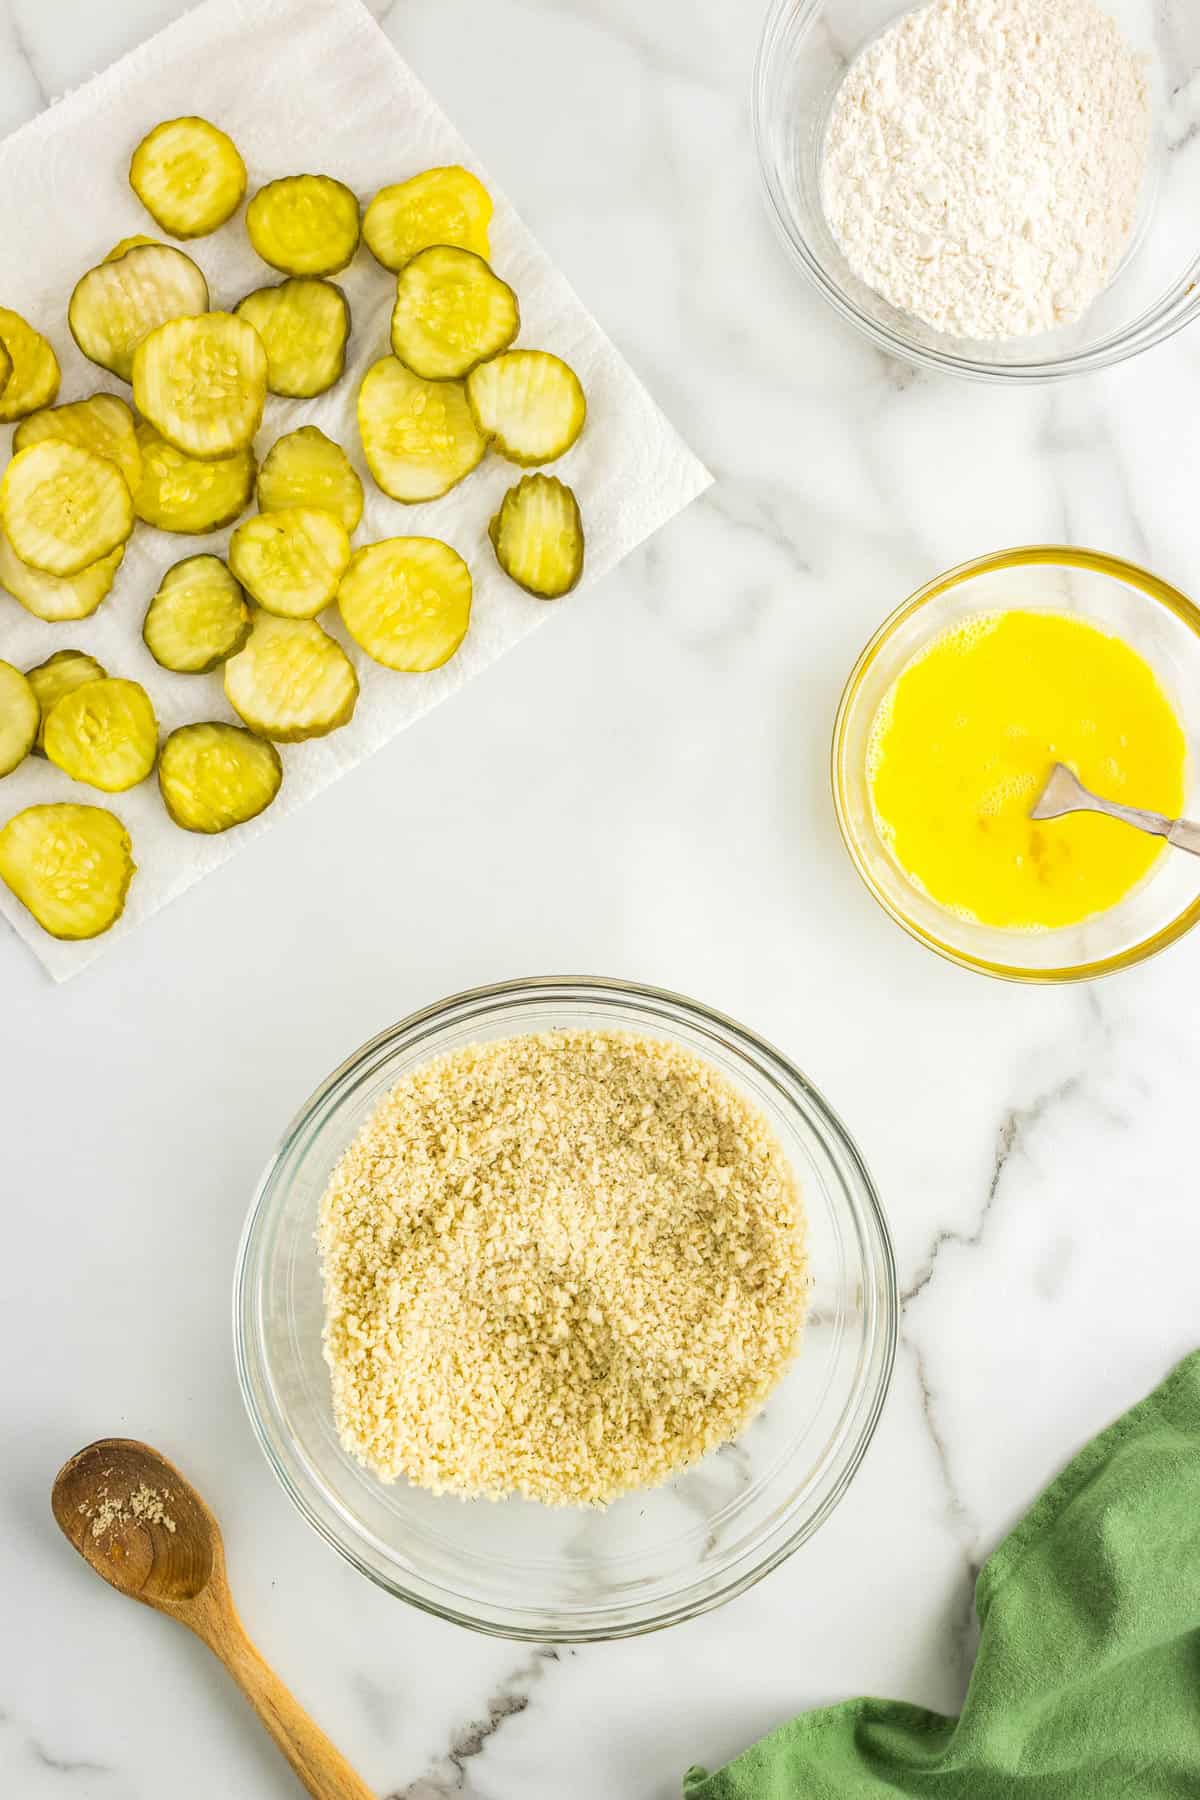 Quick and easy Air Fryer Fried Pickles are tangy, crunchy and perfectly seasoned. They are a delicious alternative to fried pickles with less calories, no splattered oil and just as yummy. Make this easy appetizer for all of your parties, the big game or just when you want a quick snack.